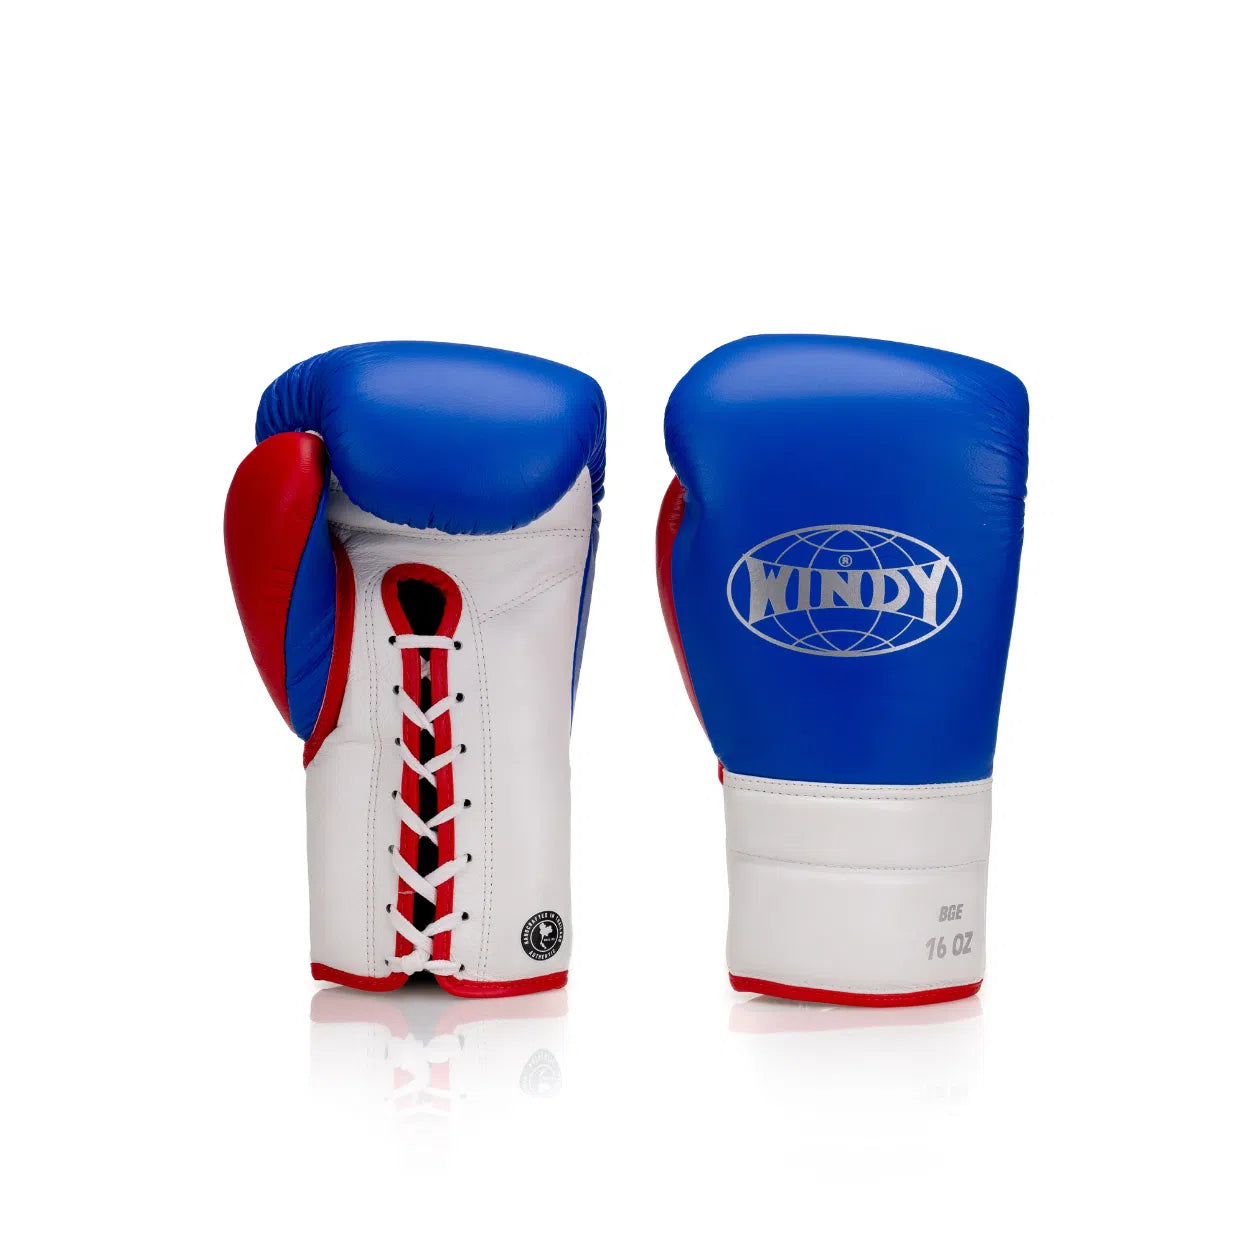 Elite Series Lace-up Boxing Glove - Blue/Red/White